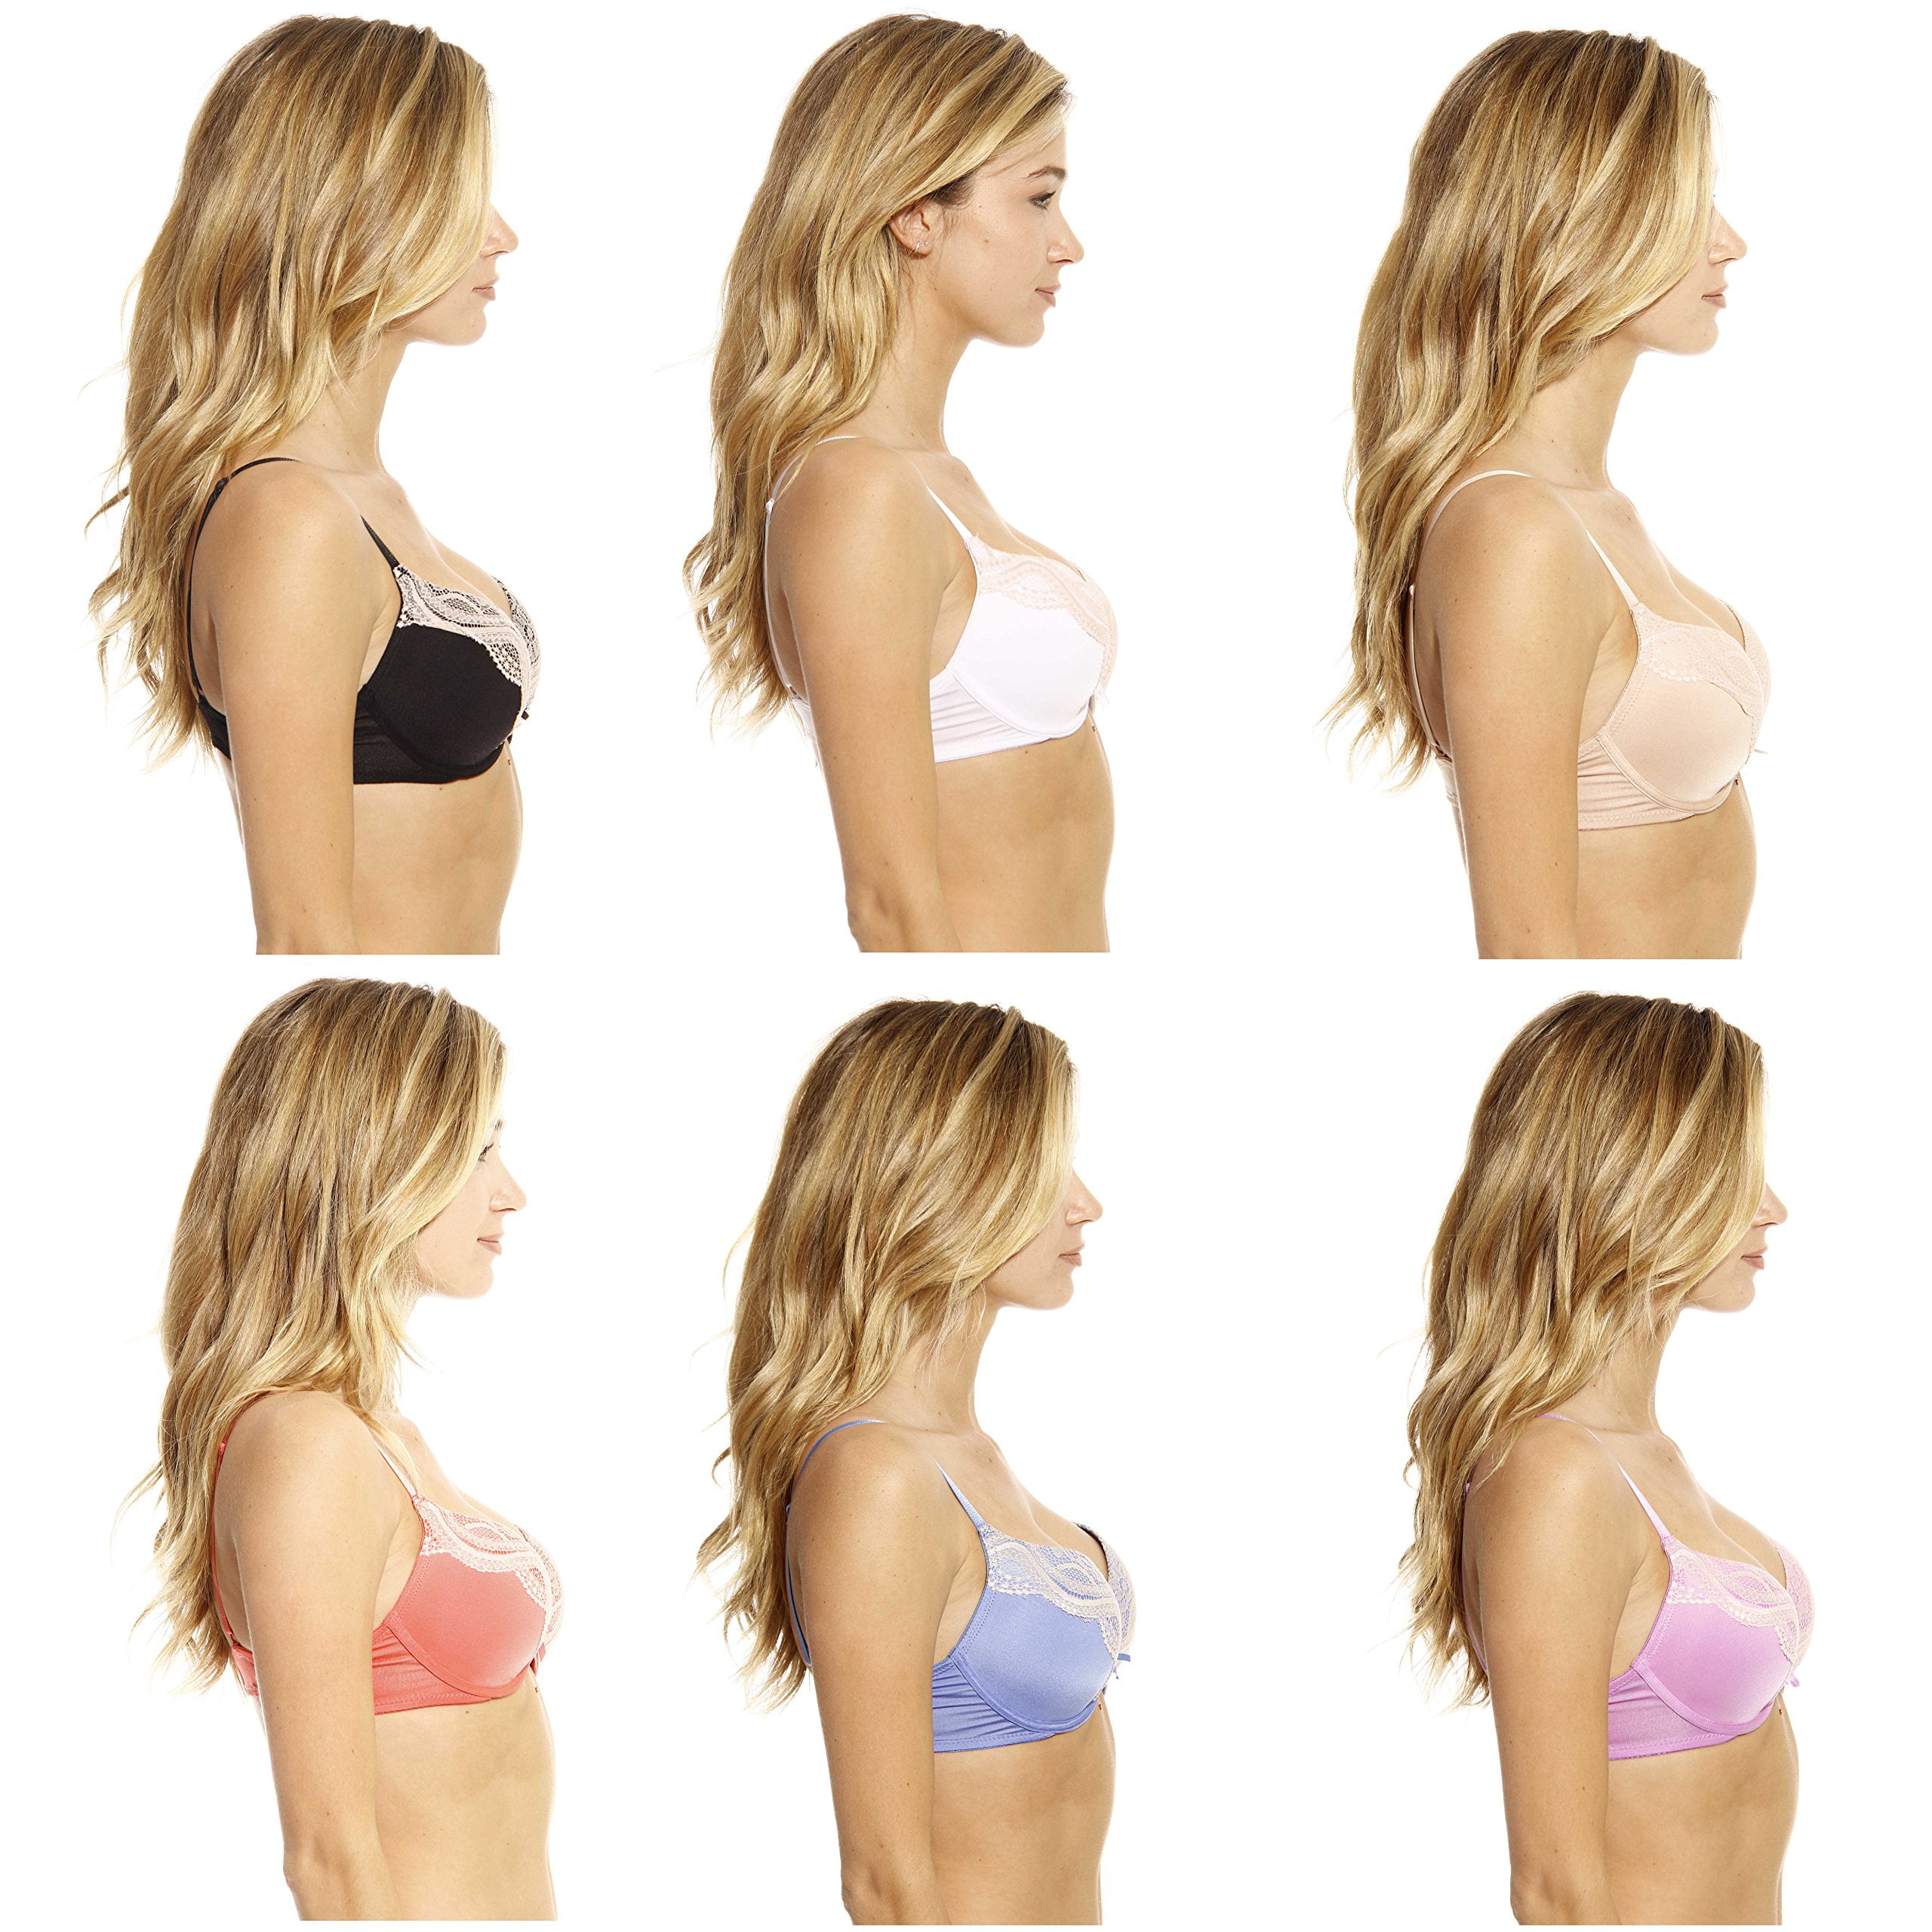 Just Intimates Double Push Up Bras for Women (Pack of 6) (Double